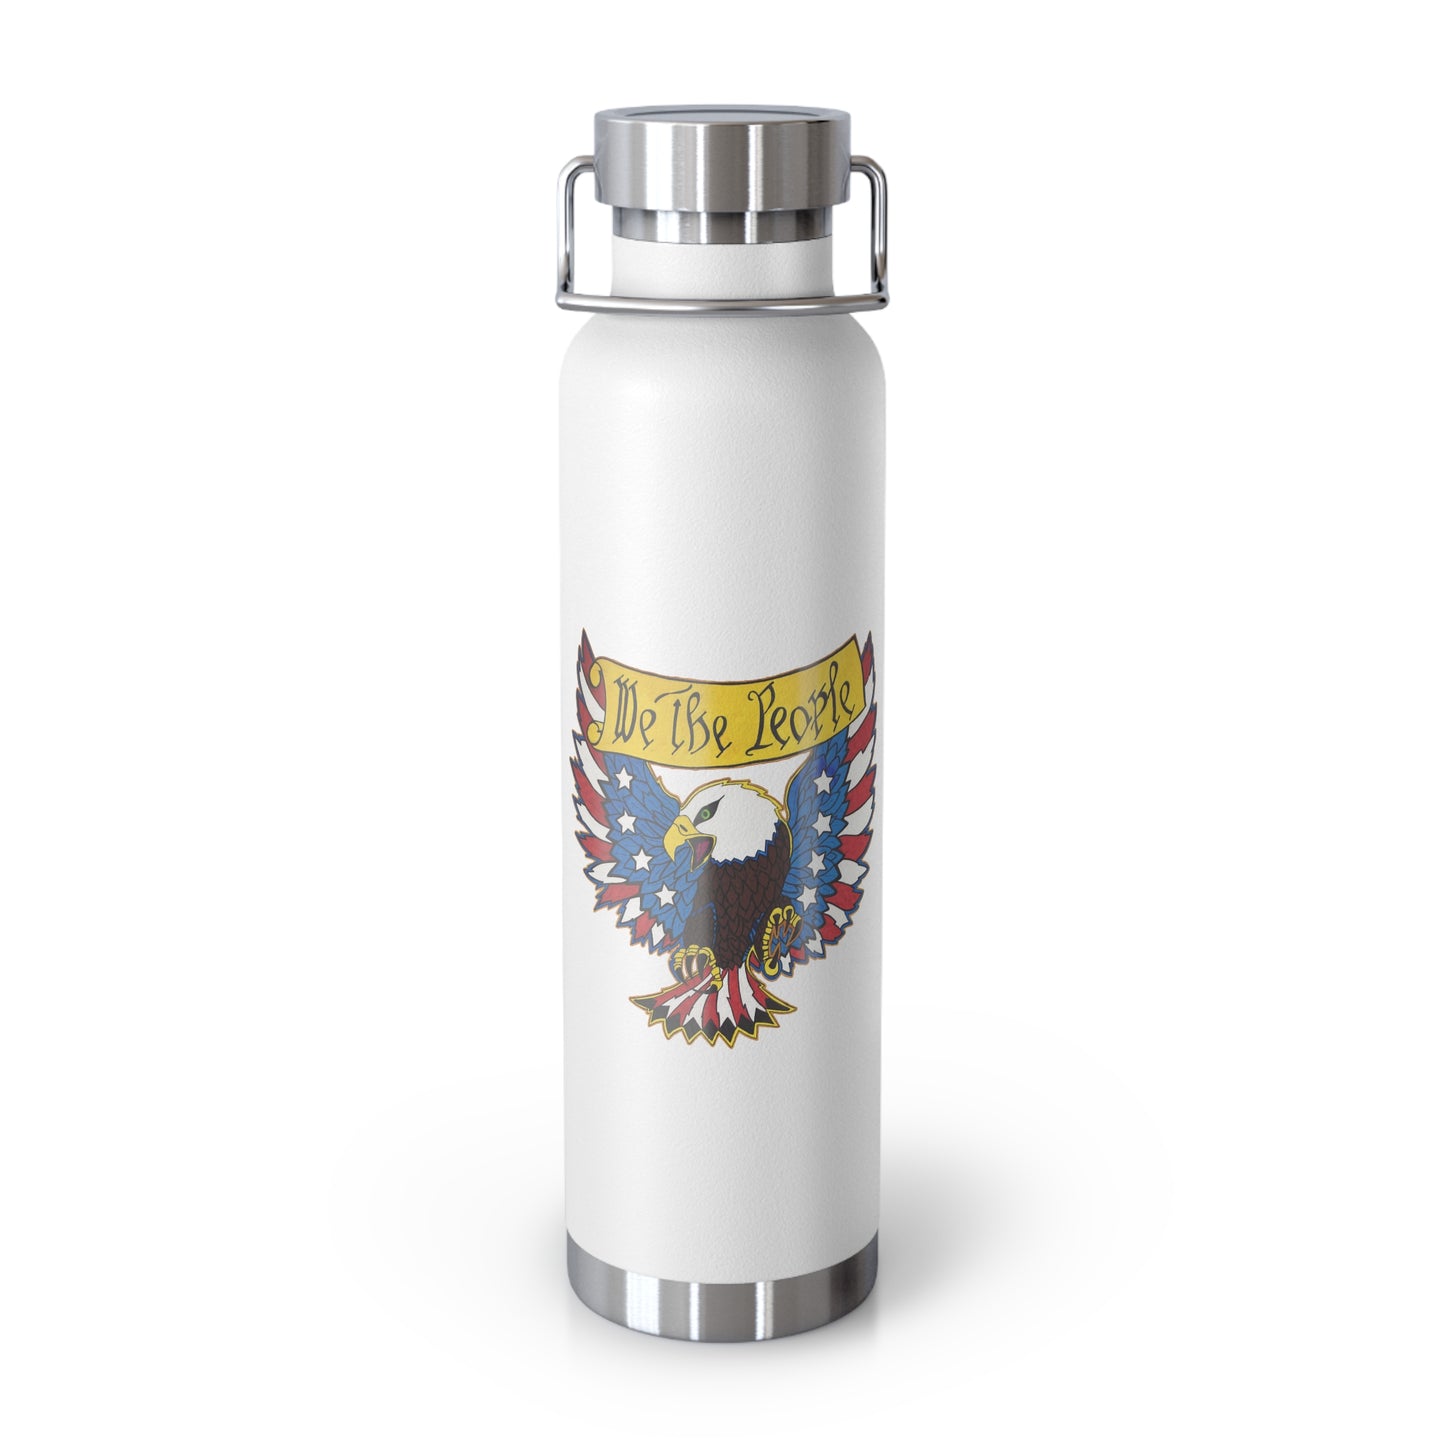 ..WE THE PEOPLE:  22oz Copper Vacuum Insulated Patriotic Water Bottle - FREE SHIPPING